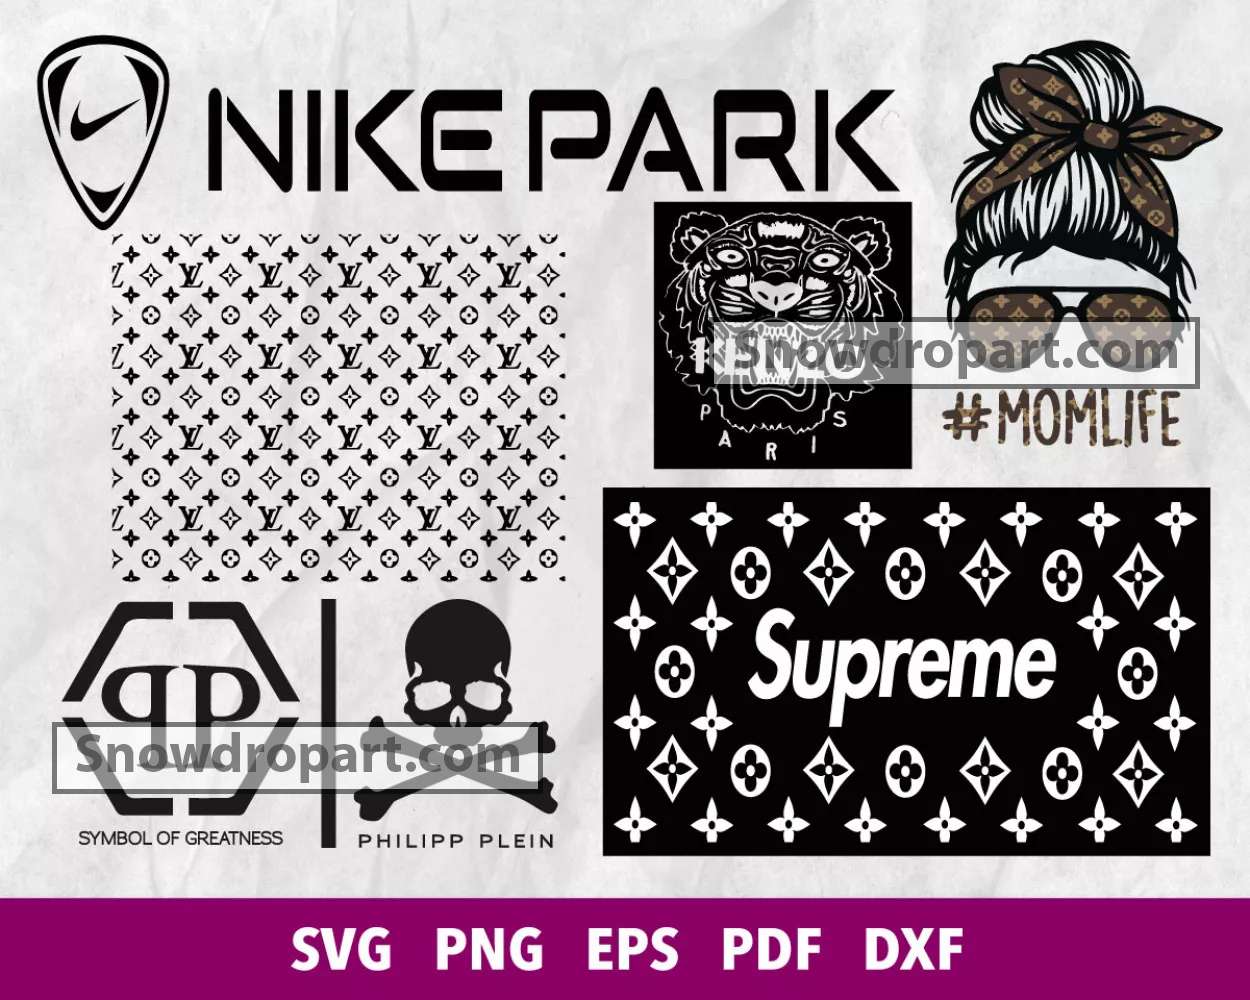 World's Fashion Brands Logos in SVG Vector and PNG File Format